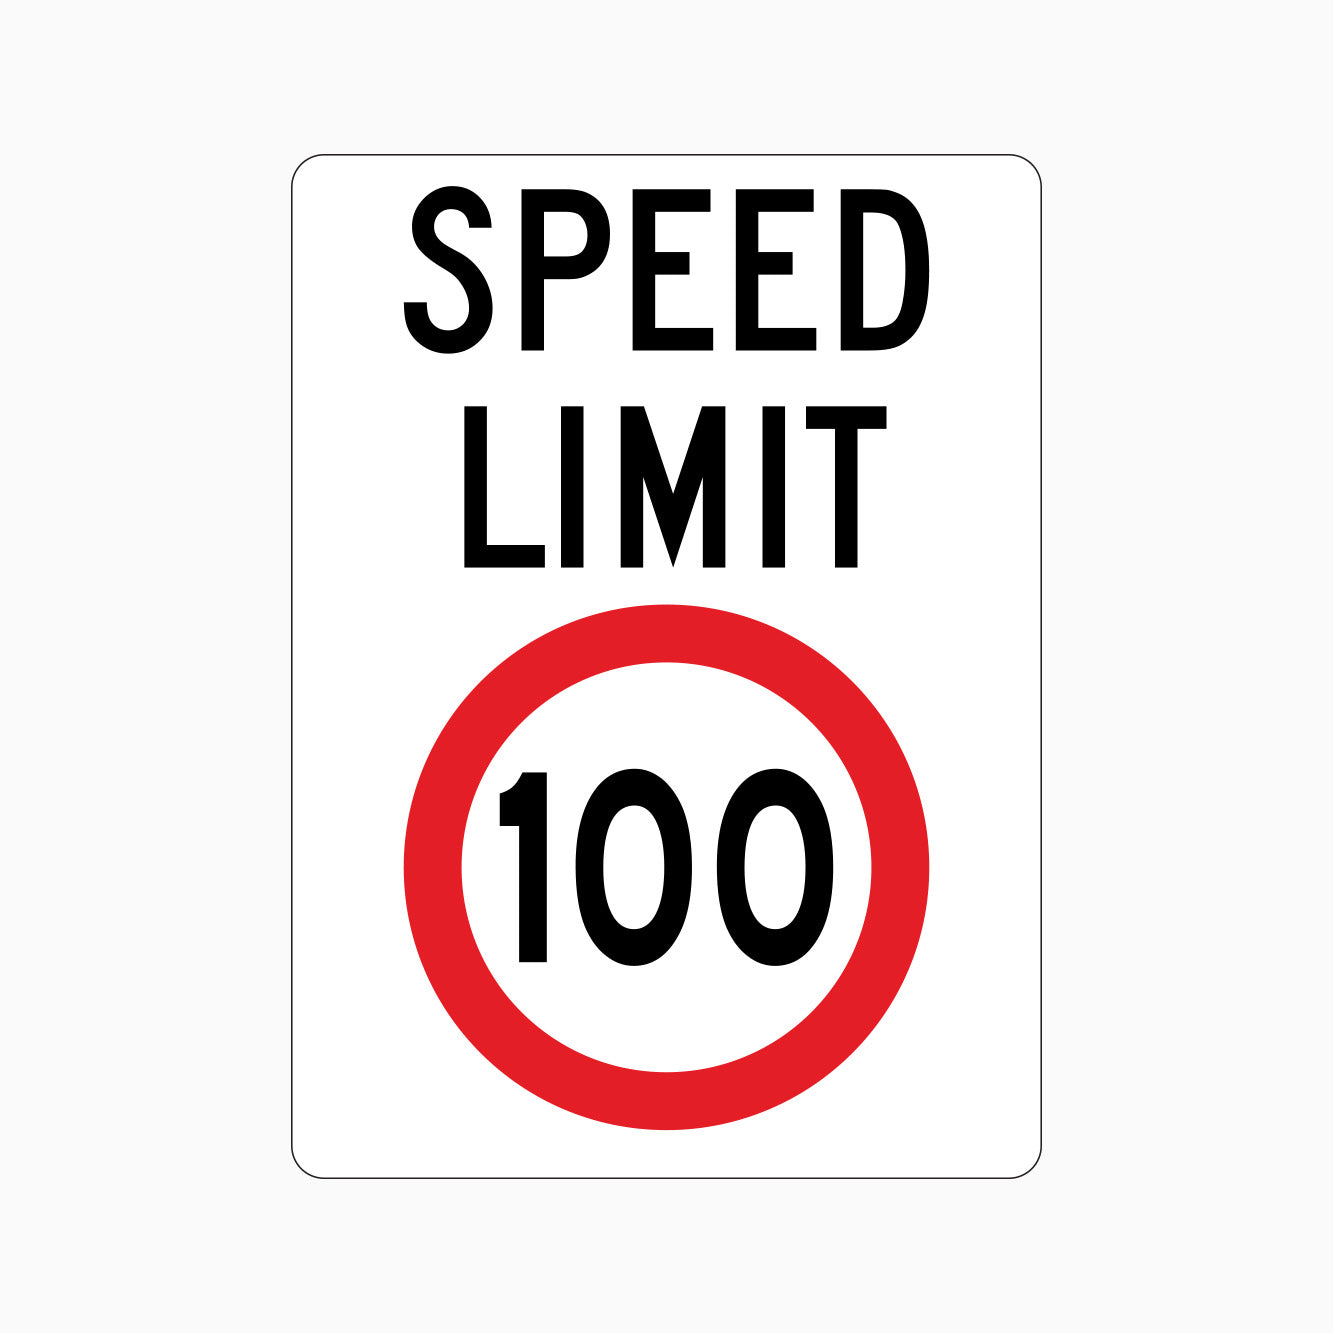 SPEED LIMIT 100km SIGN - GET SIGNS